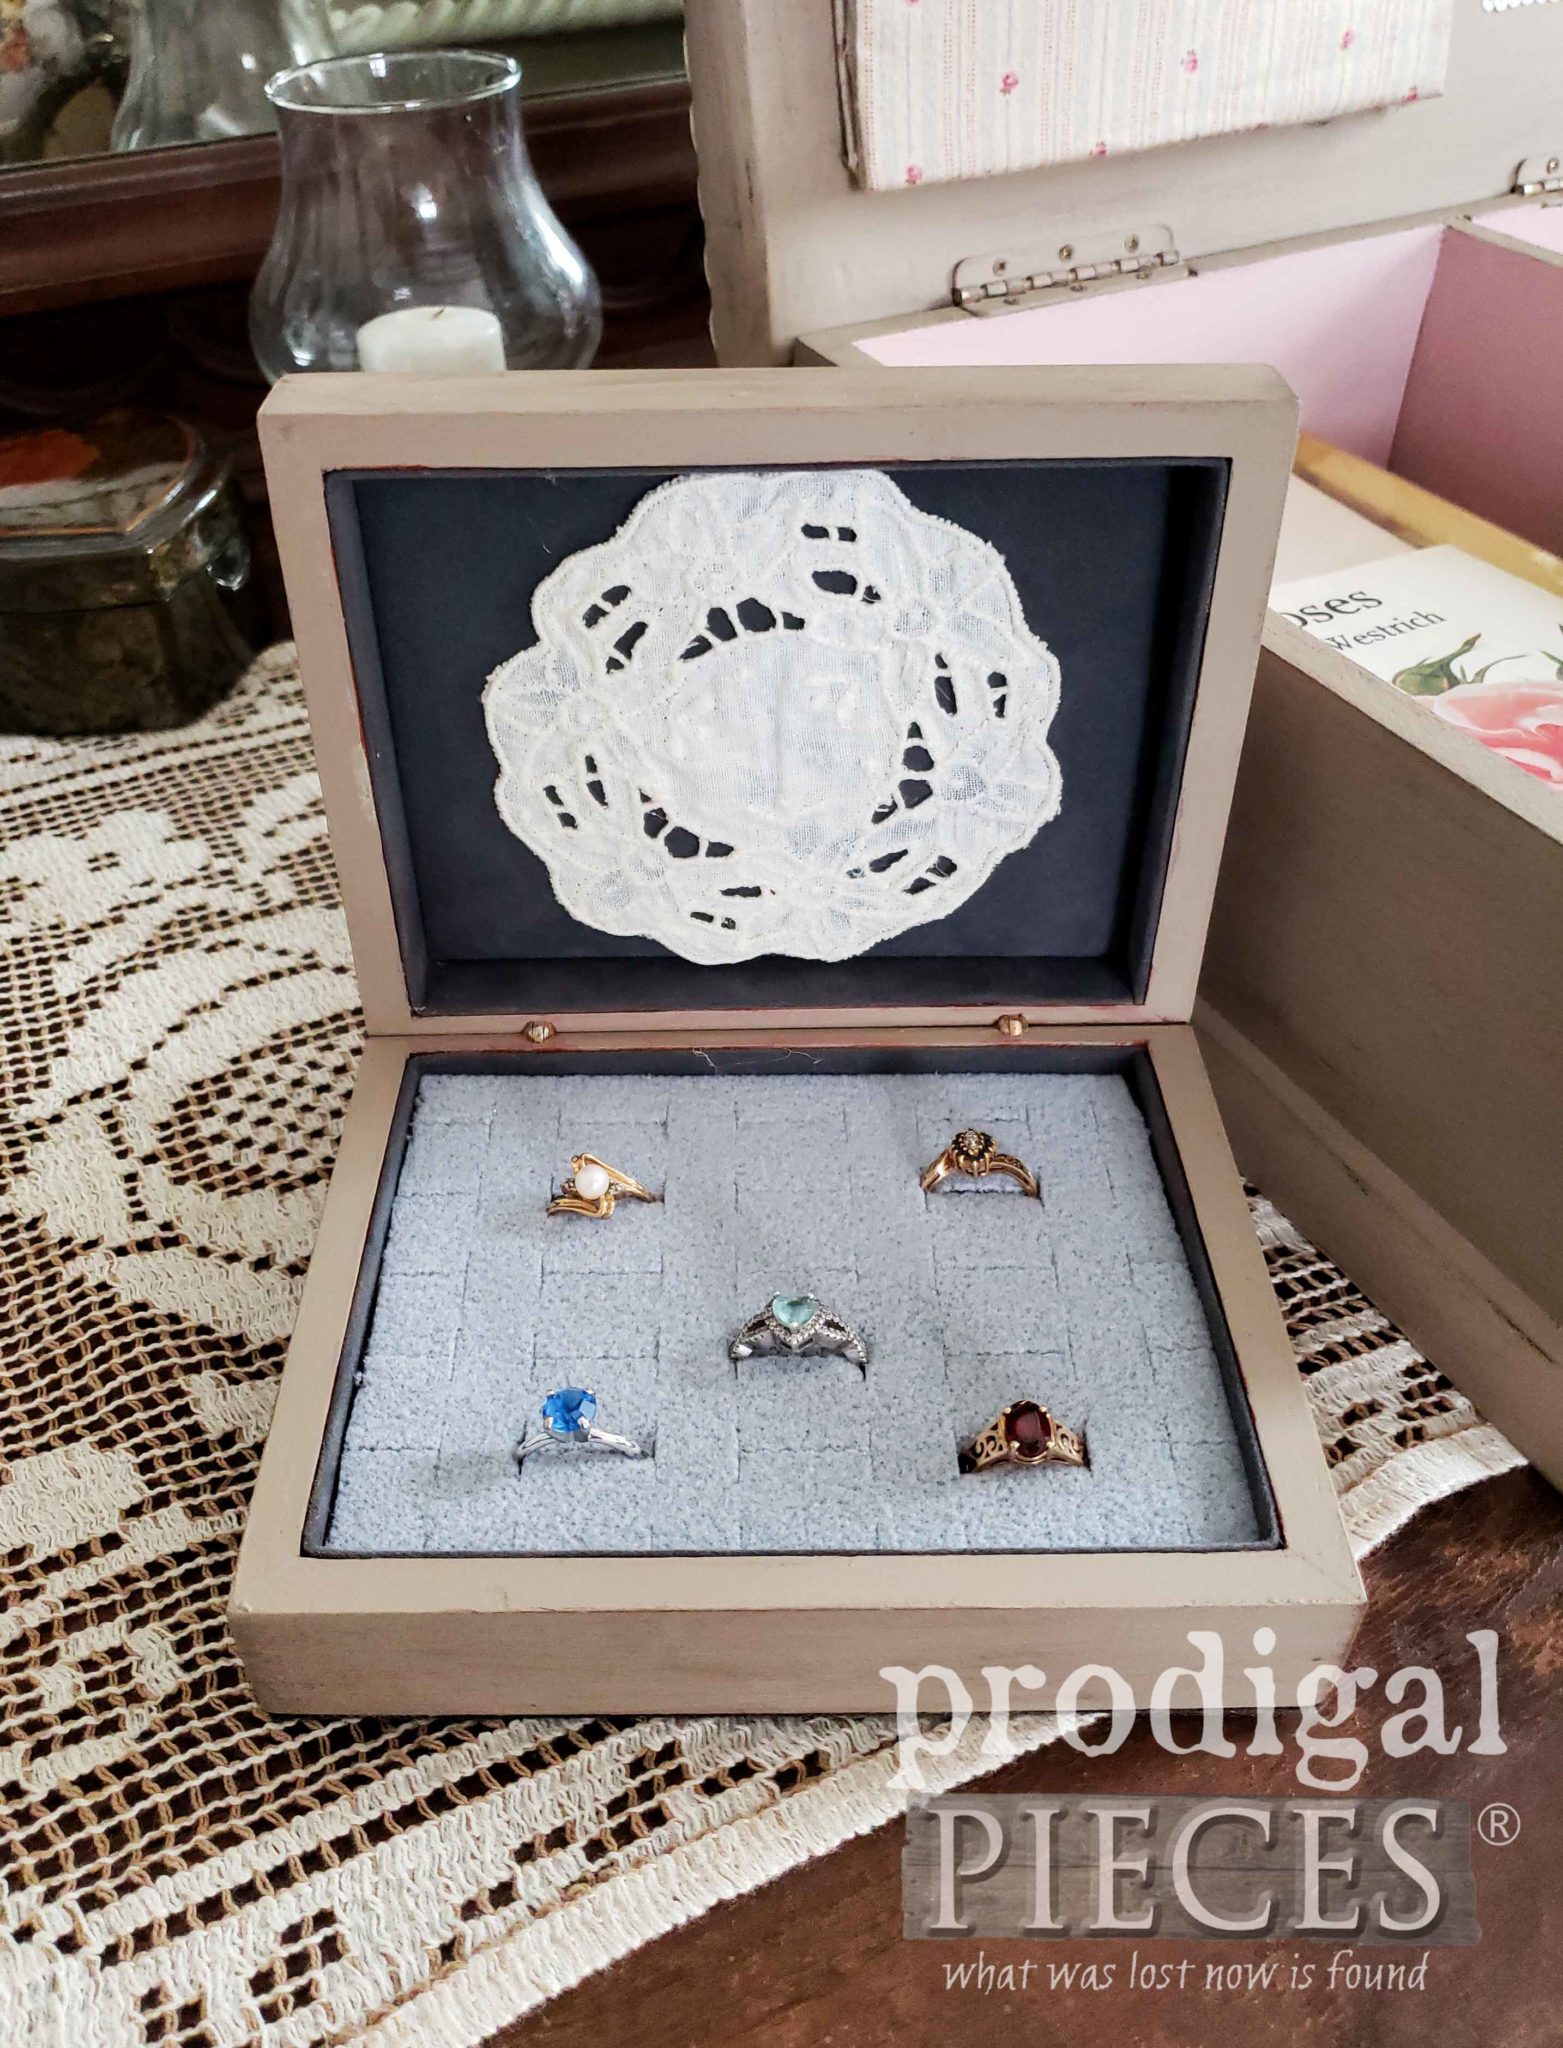 DIY Upcycled Ring Storage Box for a Thrifty Makeover by Larissa of Prodigal Pieces | Vintage Style at prodigalpieces.com #prodigalpieces #diy #handmade #home #vintage #homedecor #shopping #homedecorideas